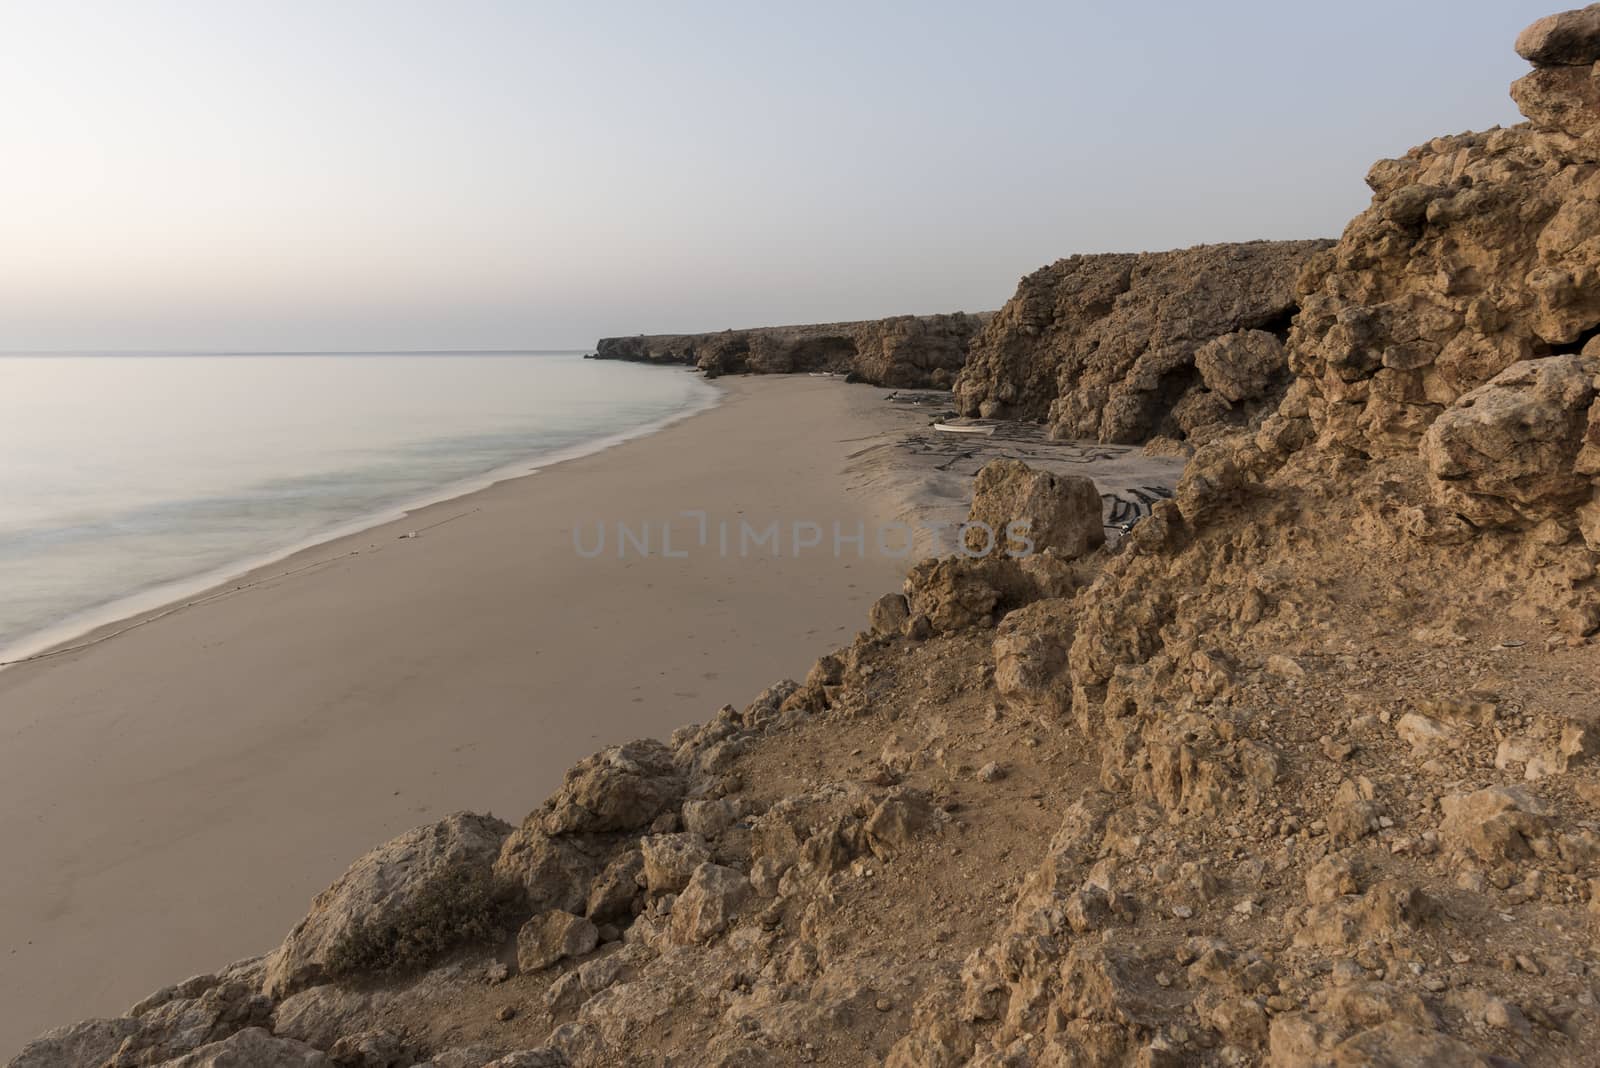 Wild beach at the coat of Ras Al Jinz, Sultanate of Oman. It is a place for fishermen to put their boats and repair their nets.